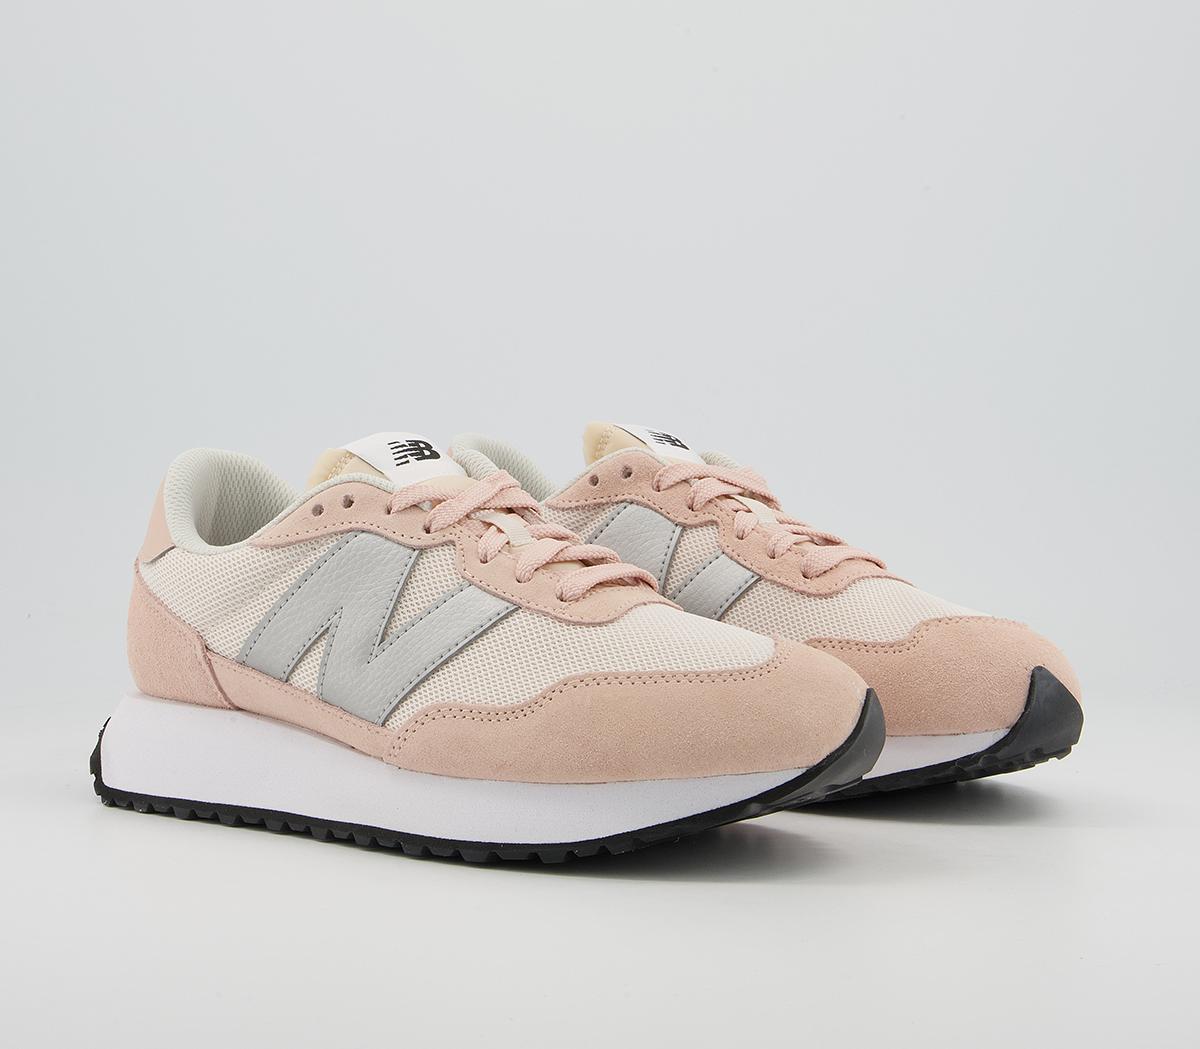 New Balance Ws237 Trainers Pink Silver White - Hers trainers